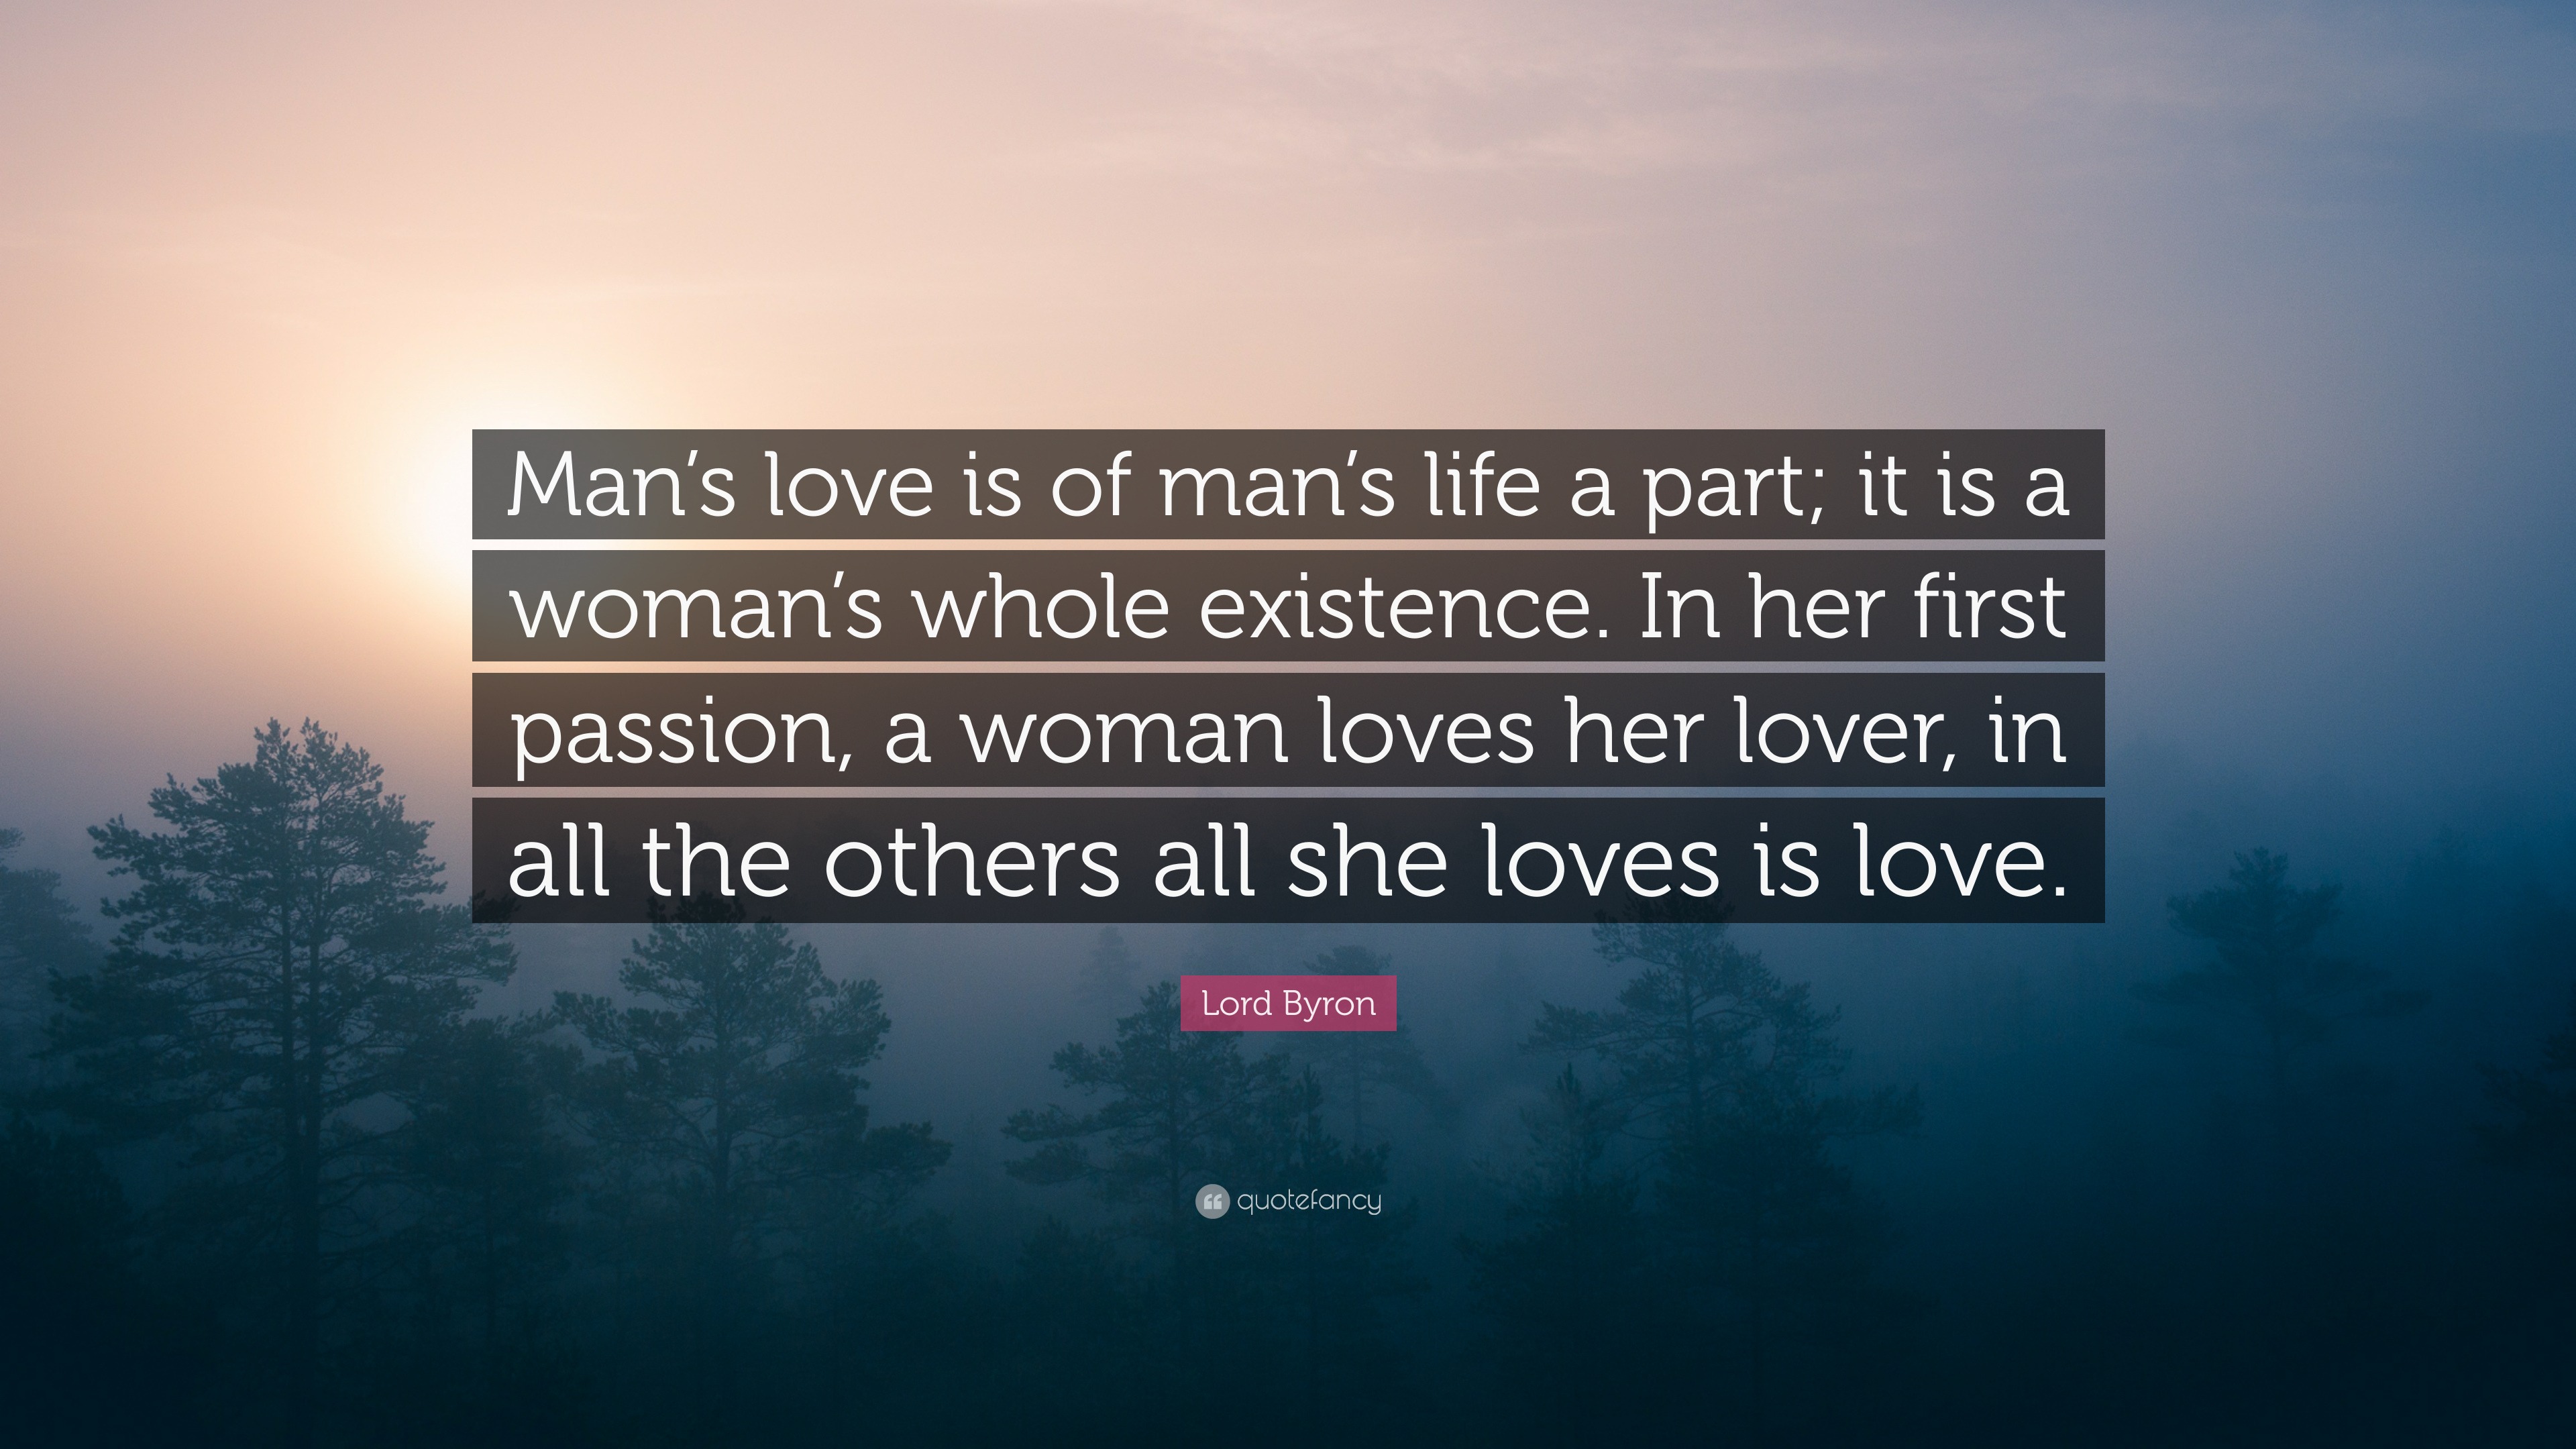 Lord Byron Quote “Man s love is of man s life a part it is